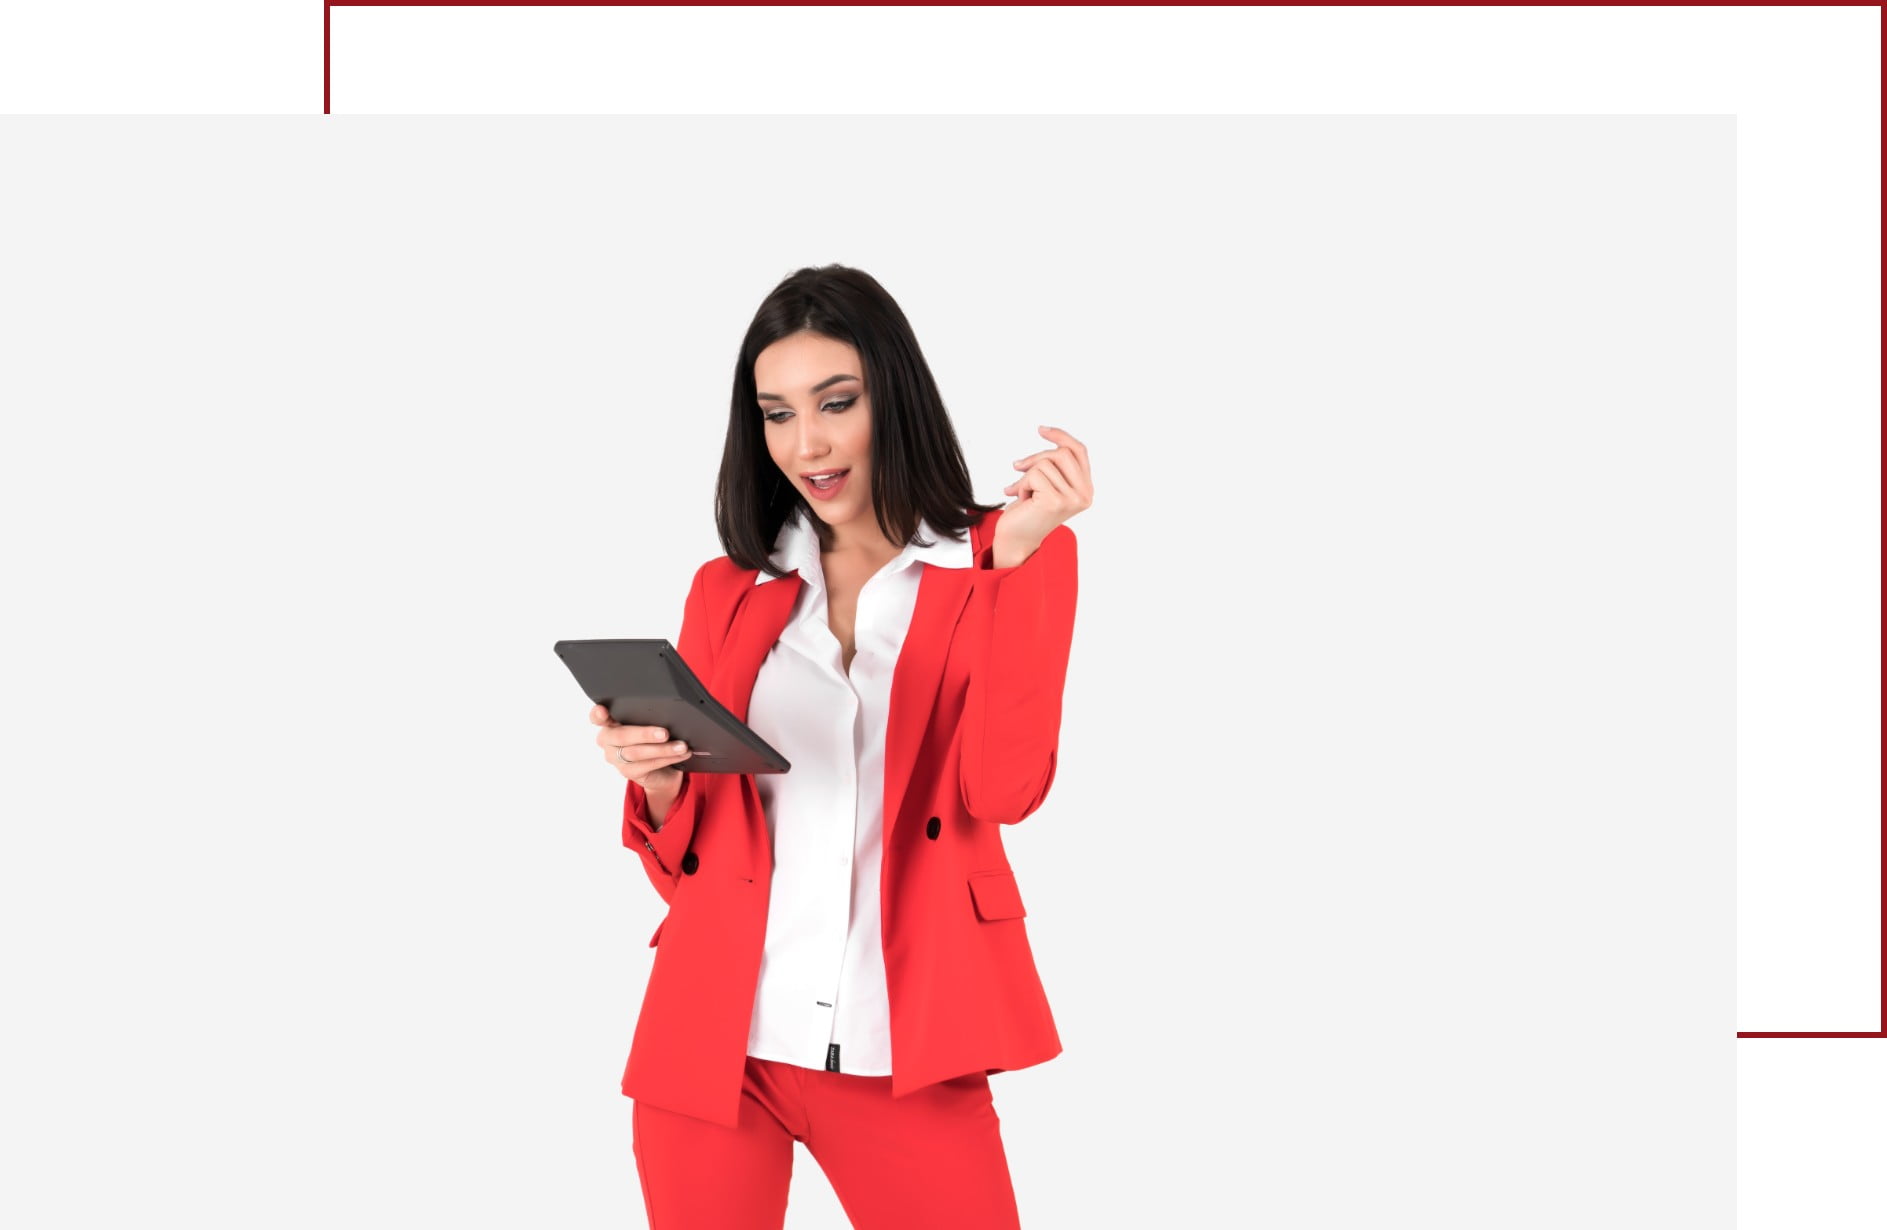 Accountant woman in red